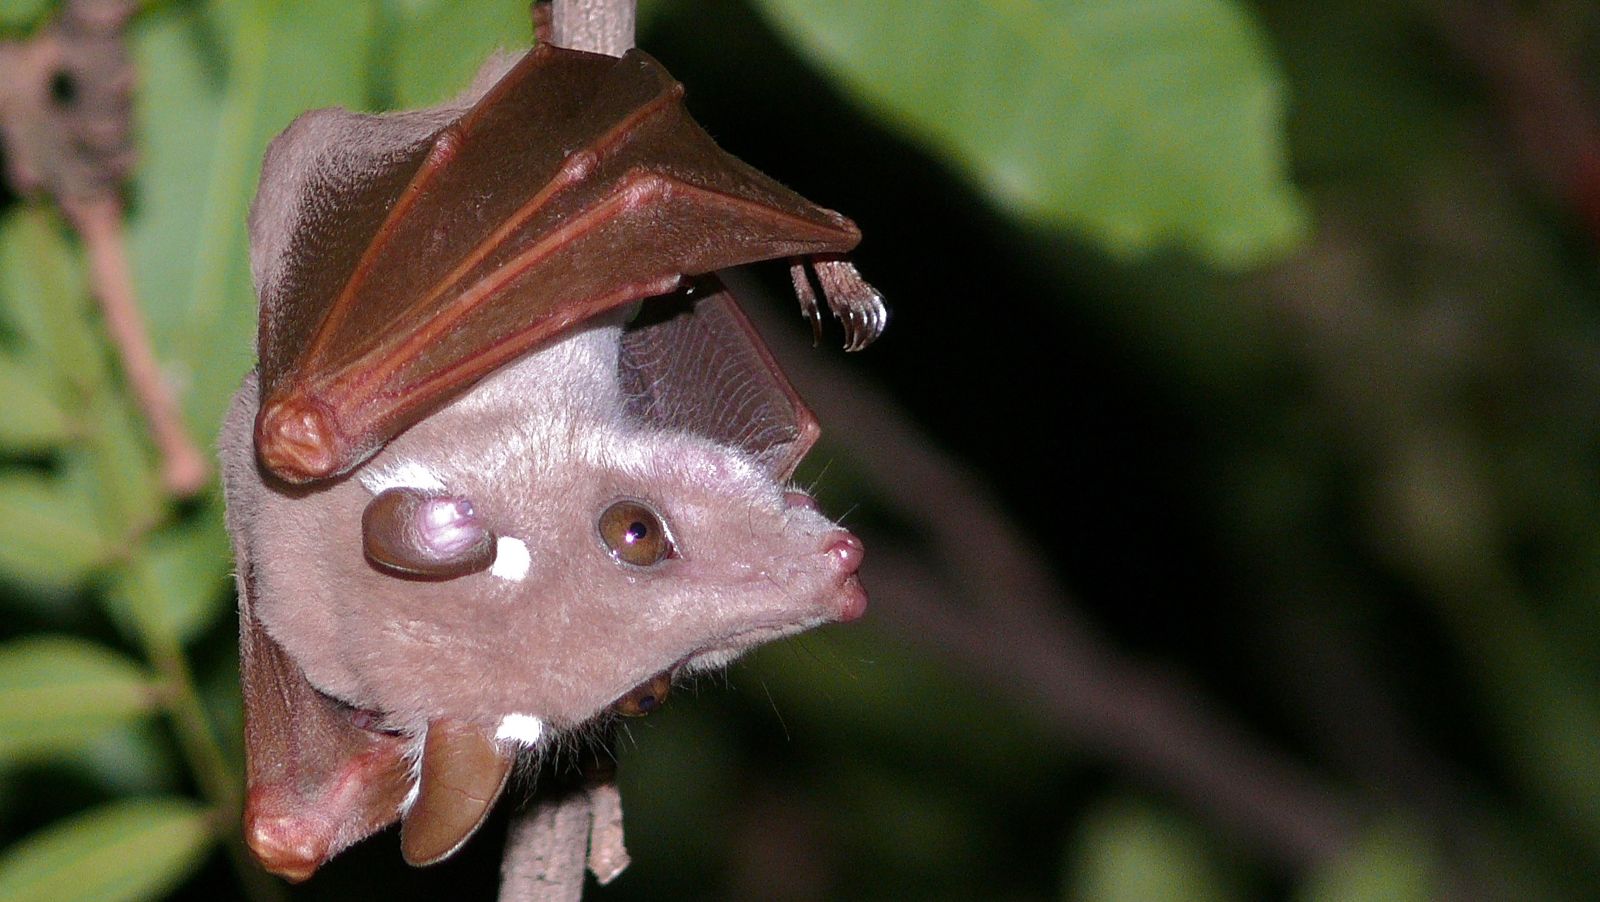 Bats practice social distancing when they are ill, preventing the spread of pathogens to others. Photo via Wikimedia Commons